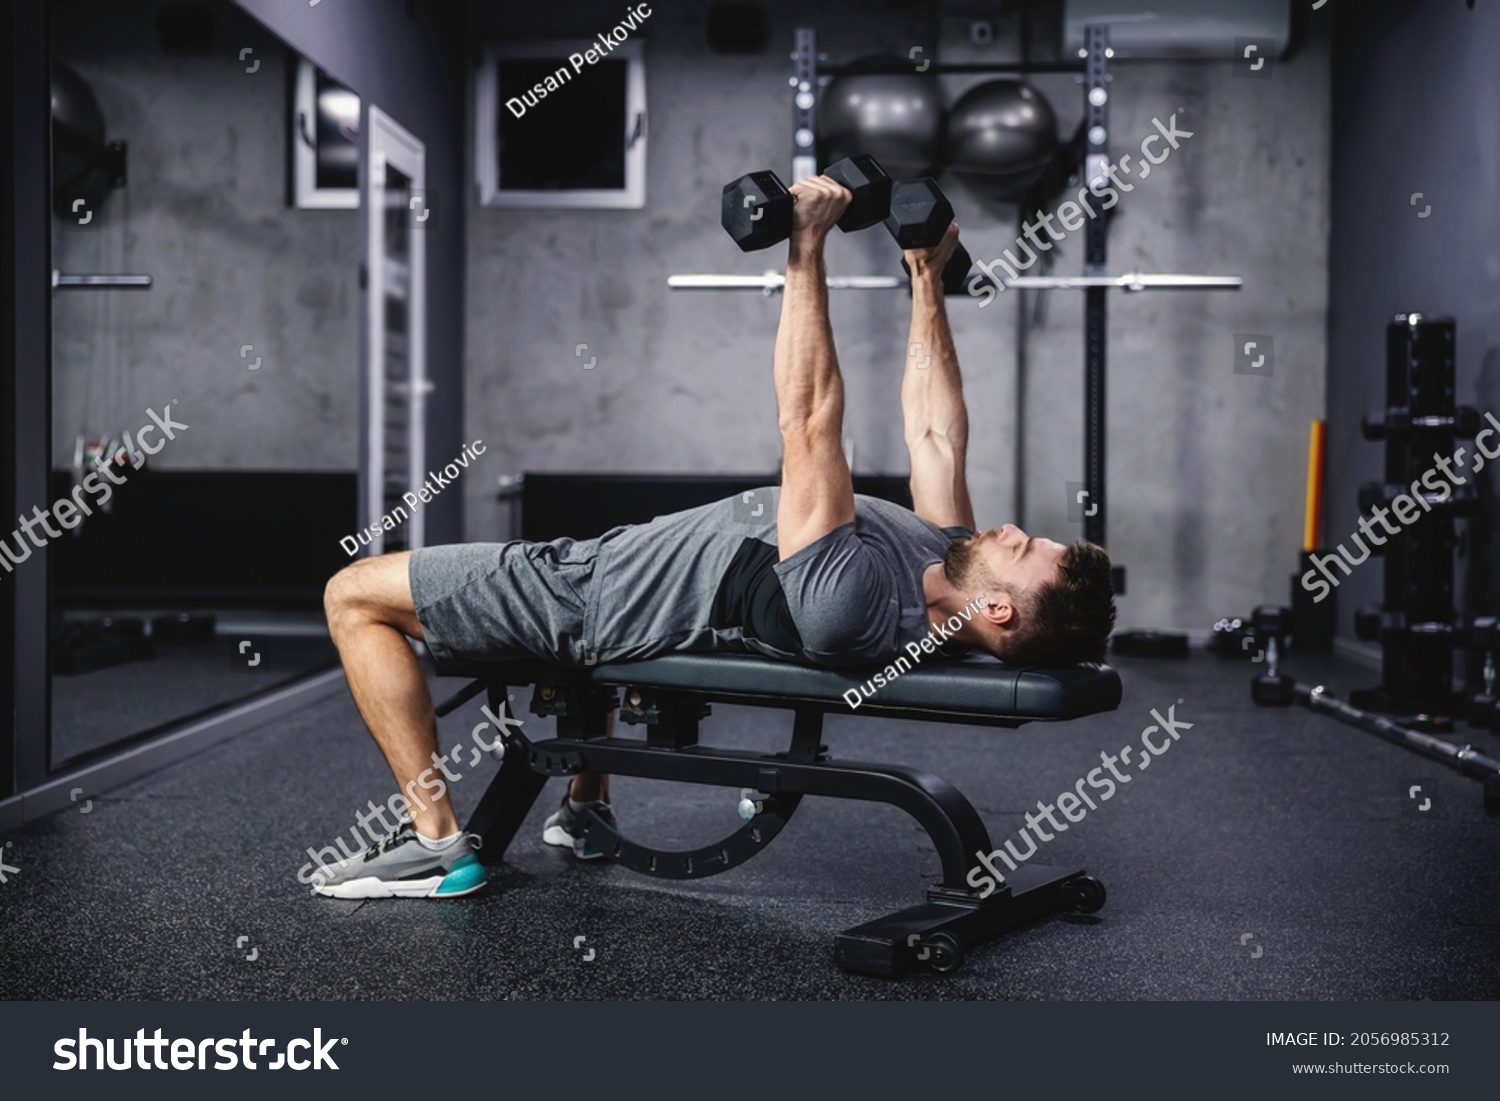 Chest and arm workout at sports bench with dumbbells. A man in sportswear lies on a sports bench and lifts dumbbells, training with a load. Strength, powerful body and physical endurance #2056985312